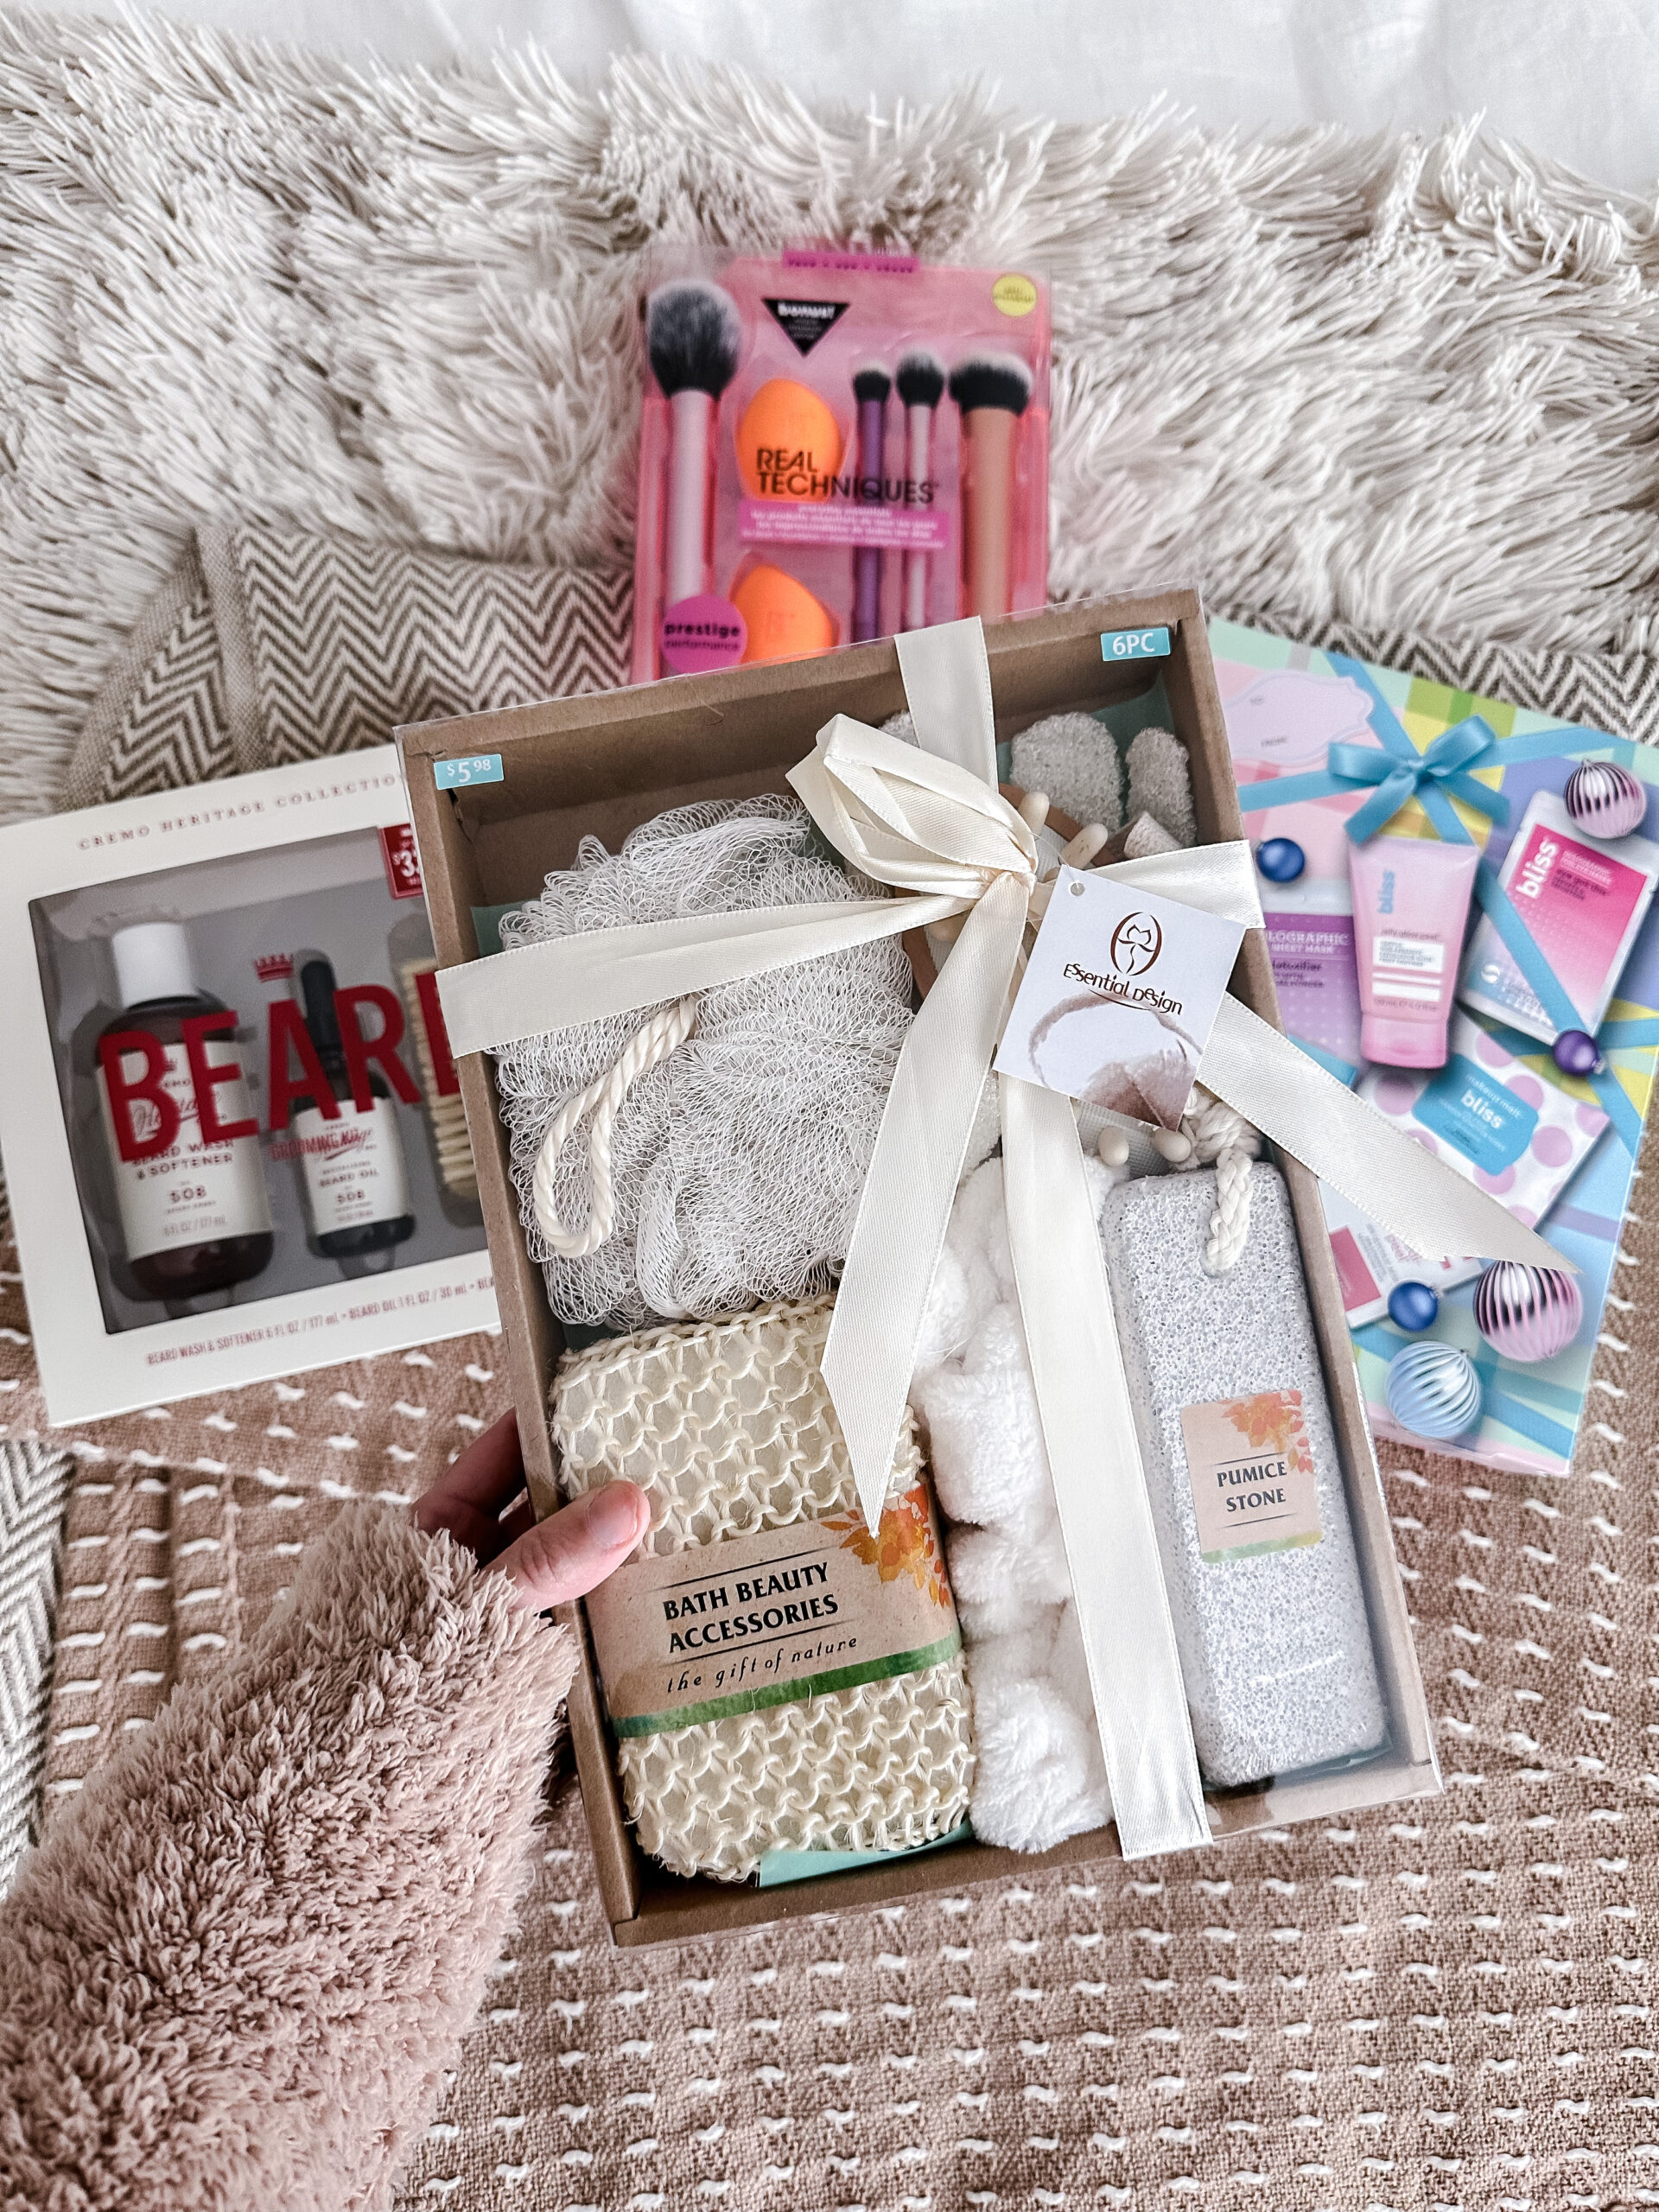 Last Minute Gifts from Walmart-Jaclyn De Leon Style. Sharing some last minute gift options from Walmart including stocking stuffers and gift sets.